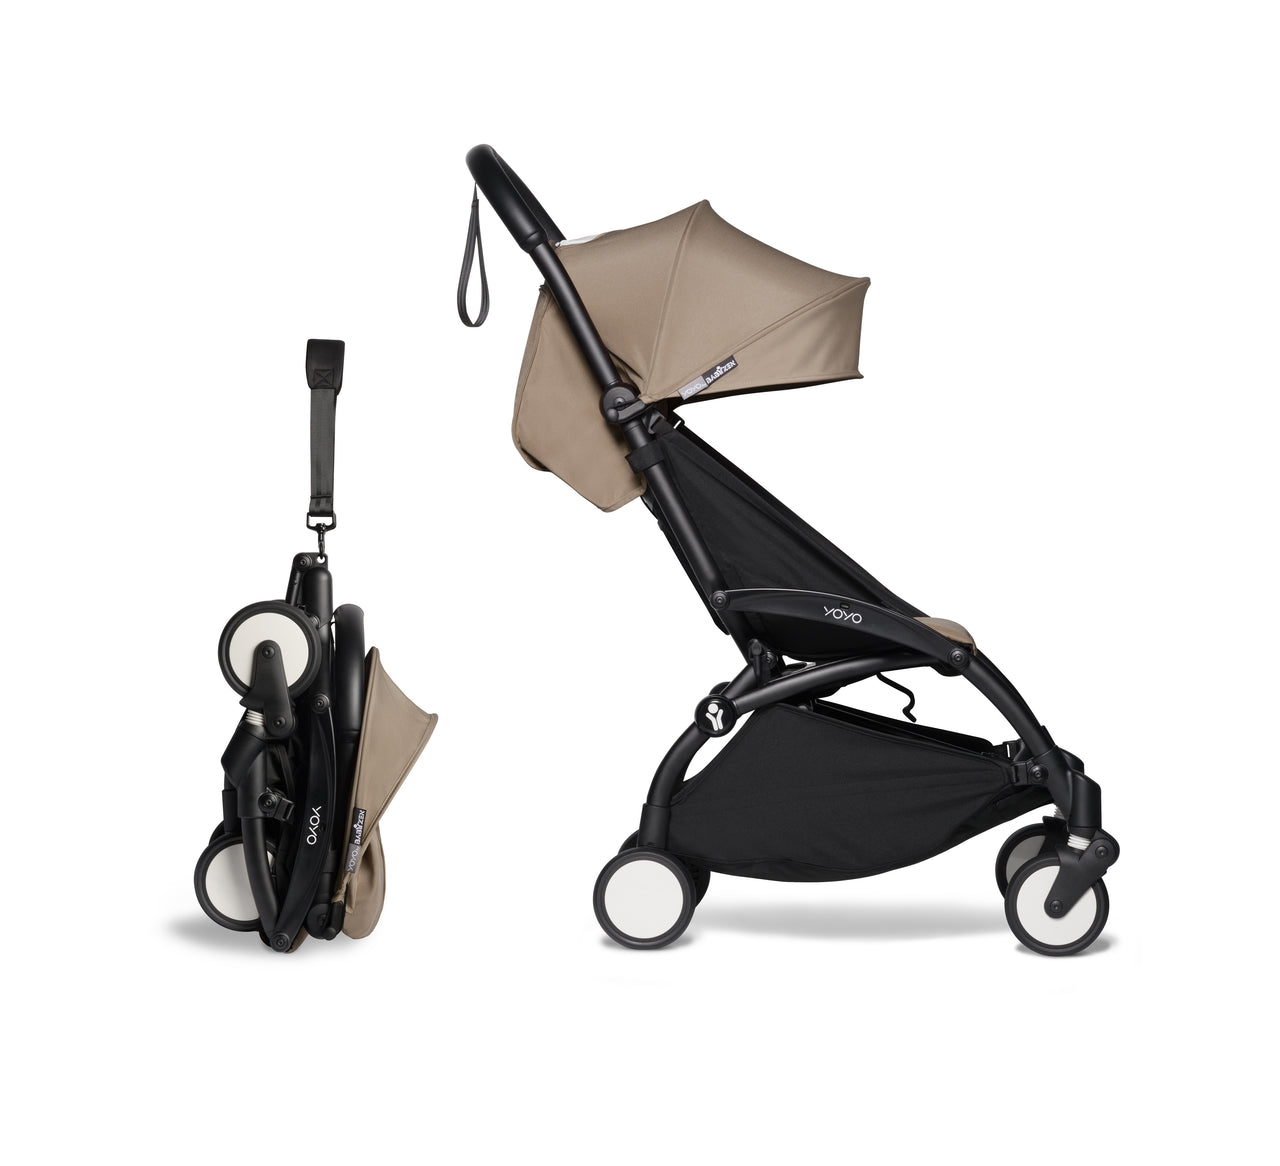 BABYZEN YOYO² 6+ Stroller -  Taupe with FREE BACKPACK!